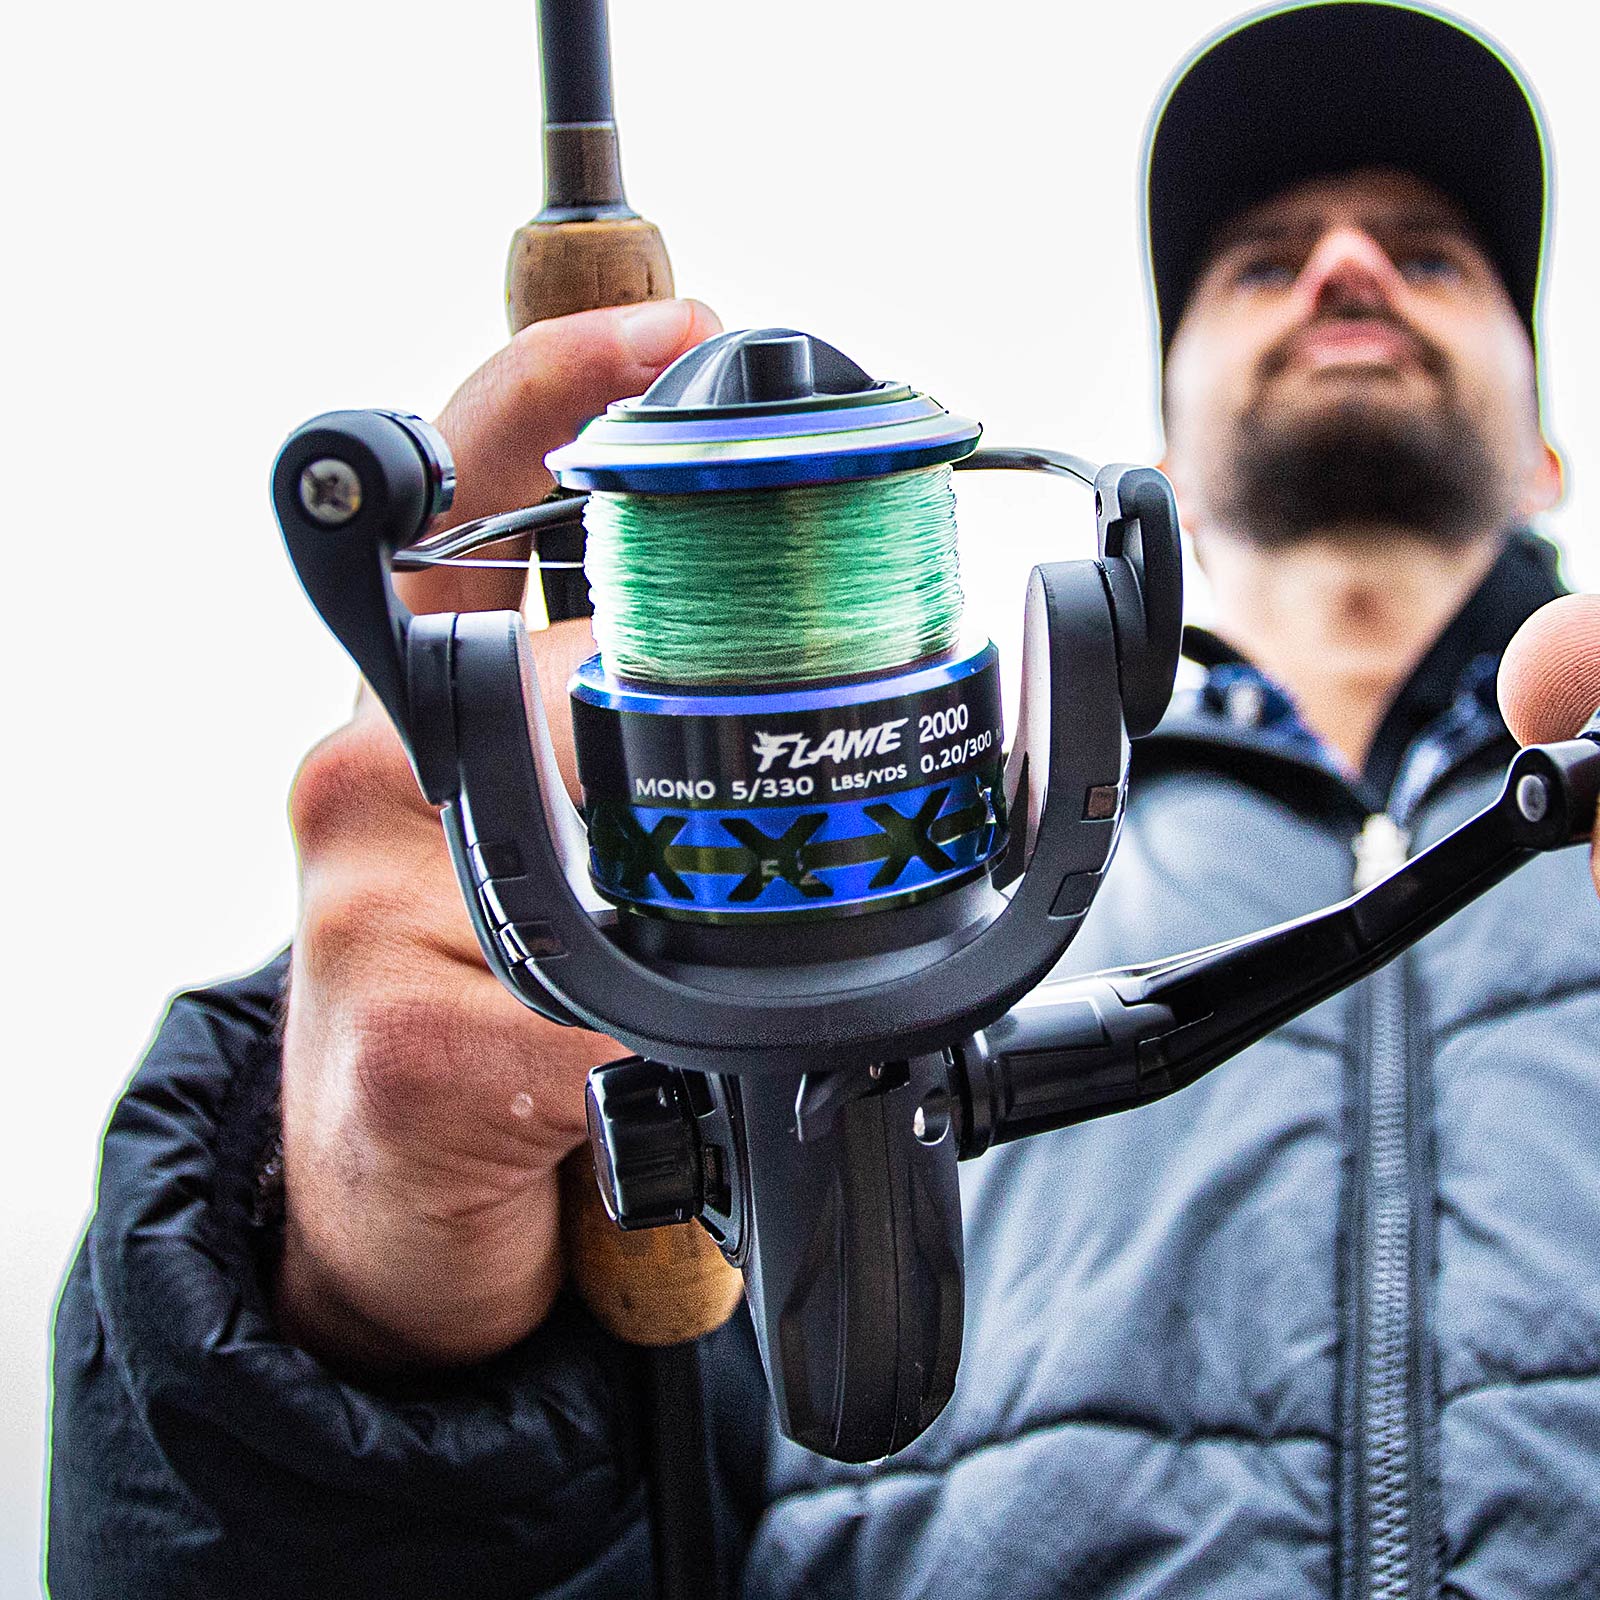 Piscifun® Carnivore X Baitfeeder Spinning Reel For, 53% OFF